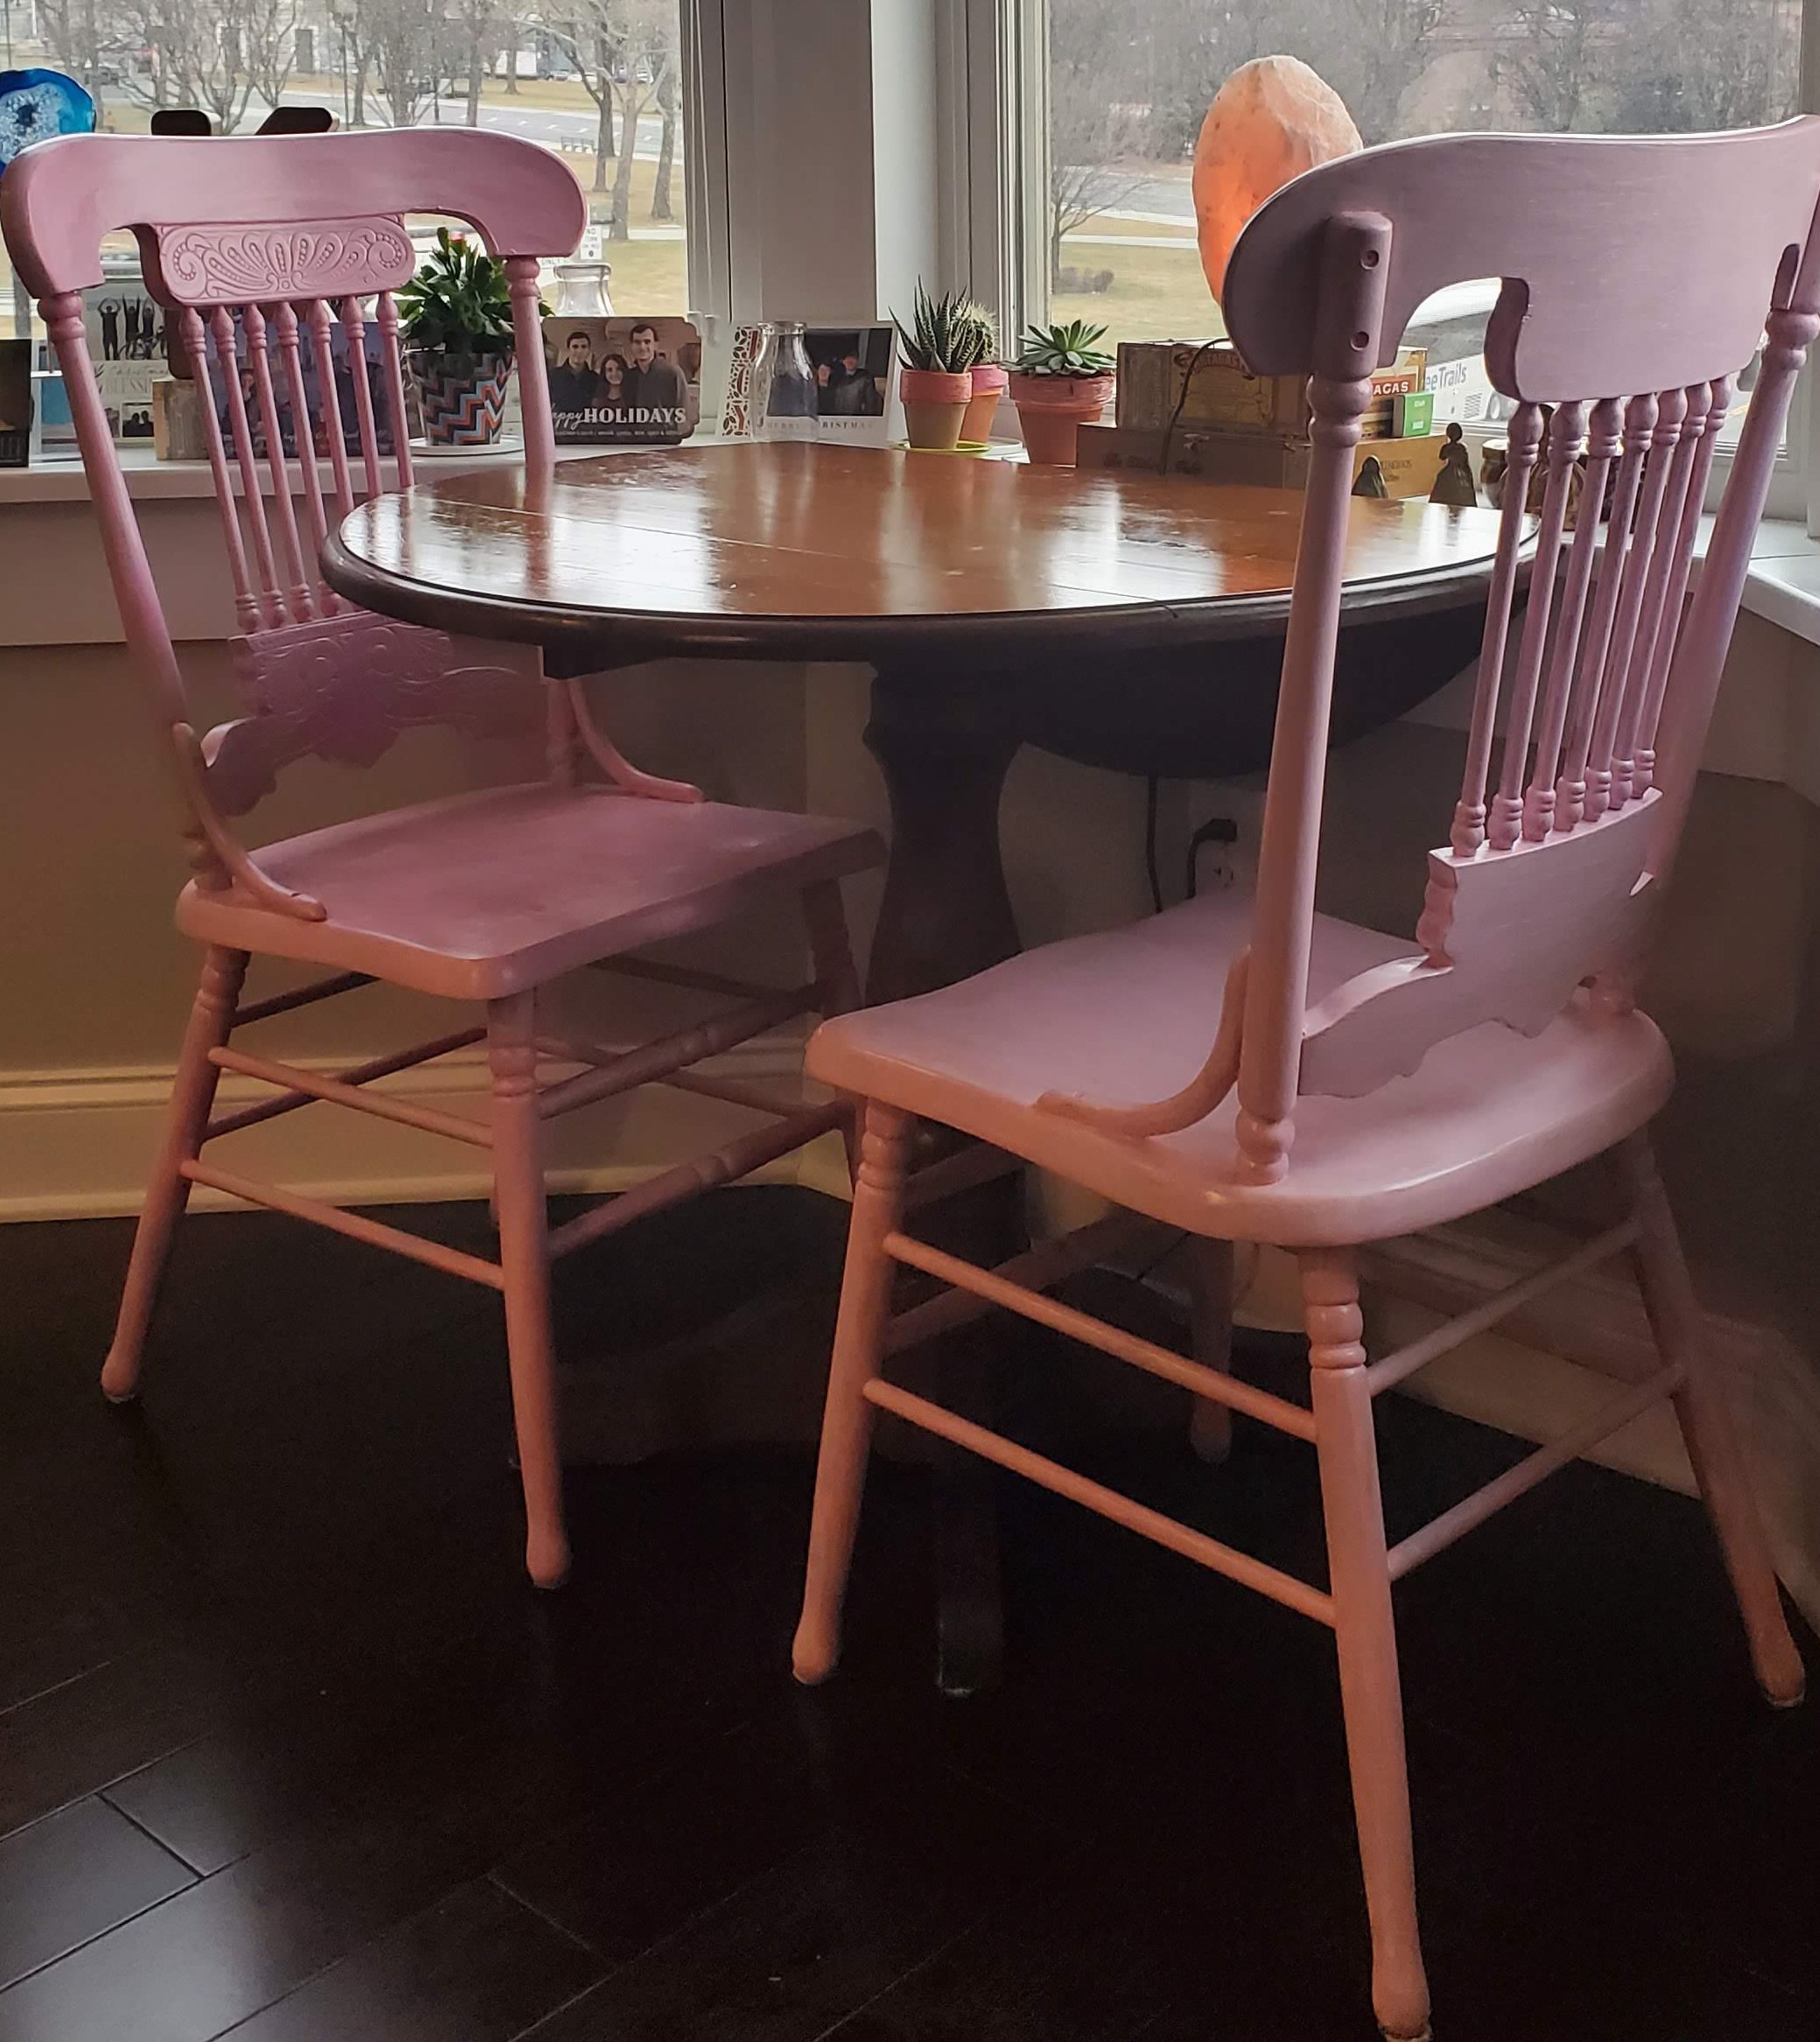 My new reality is pink kitchen chairs. What's yours?